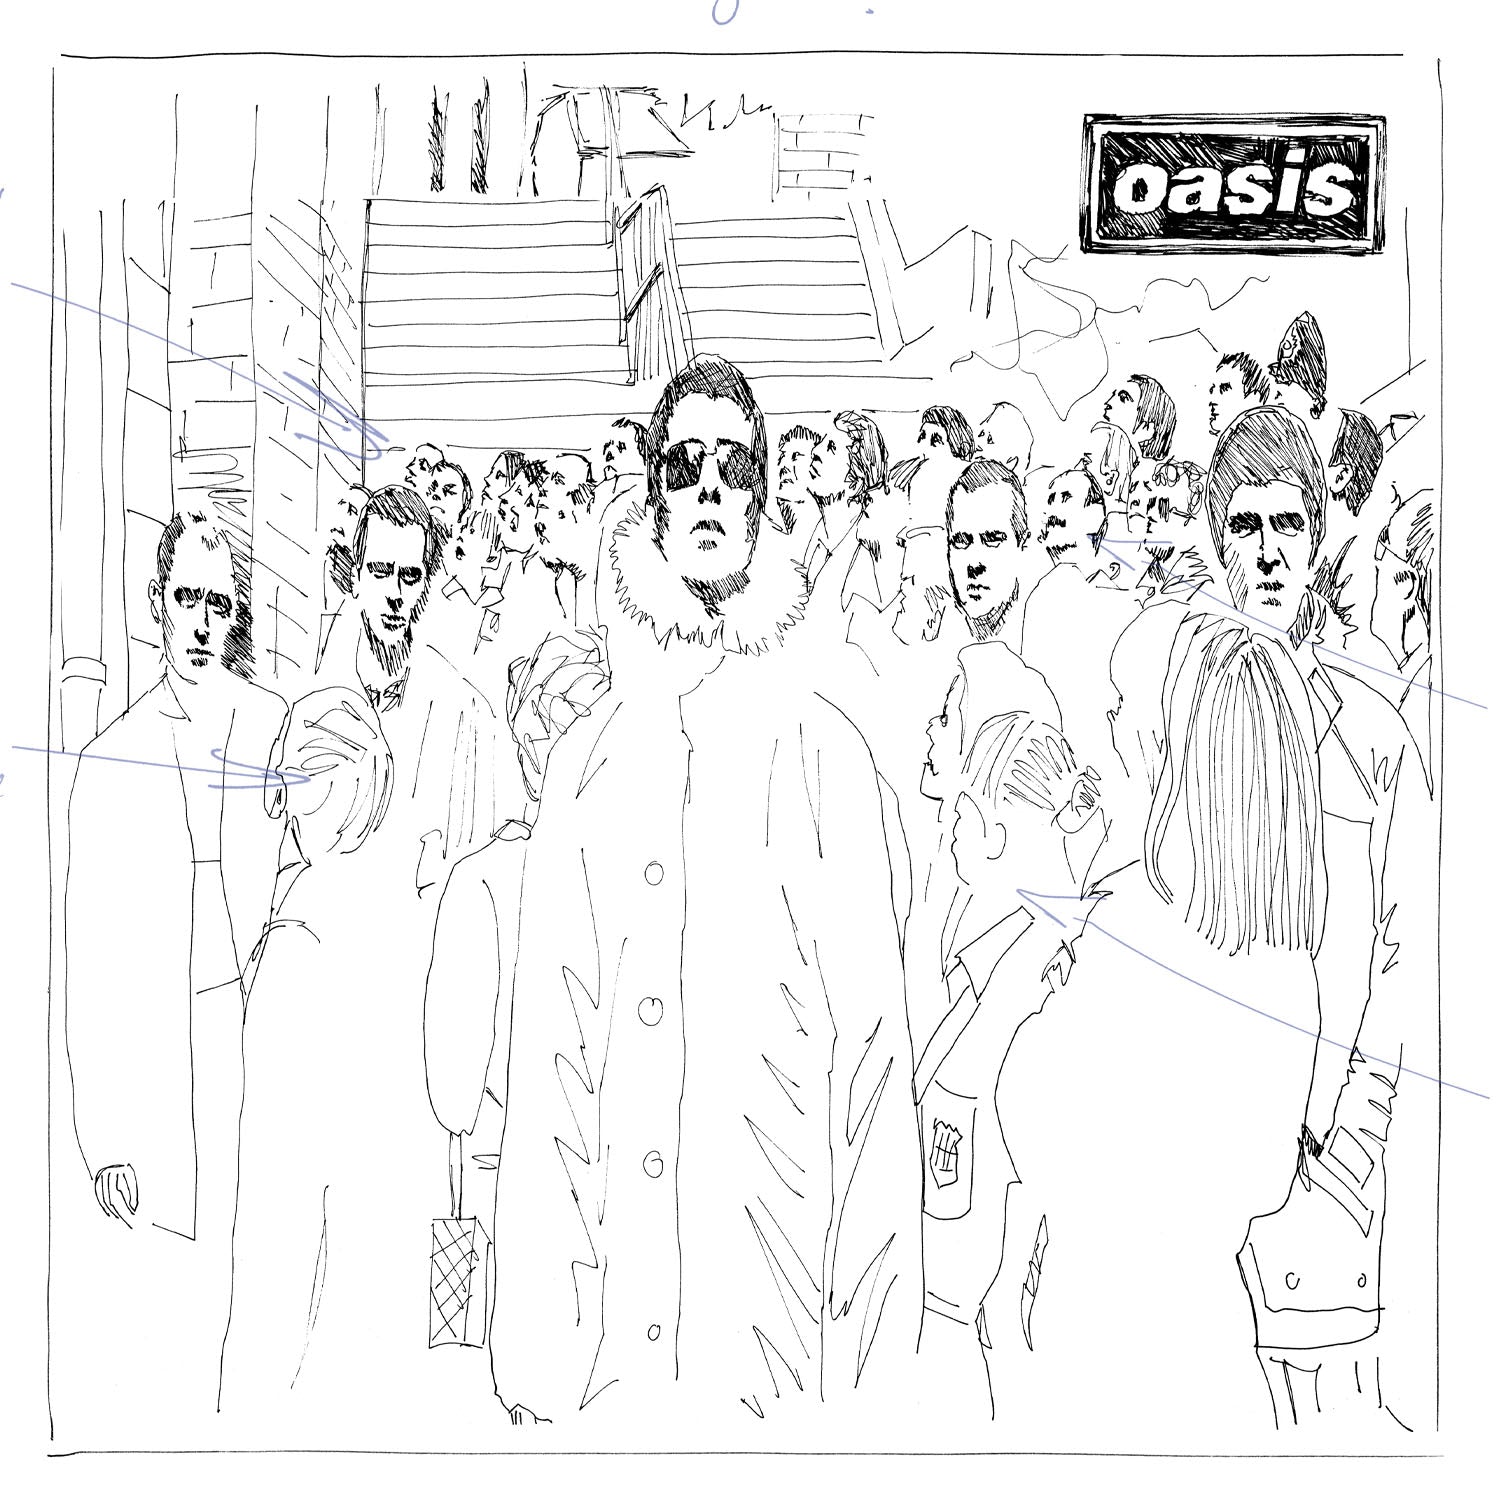 Oasis - D'You Know What I Mean? - Ltd Edition Illustration Print - New Item